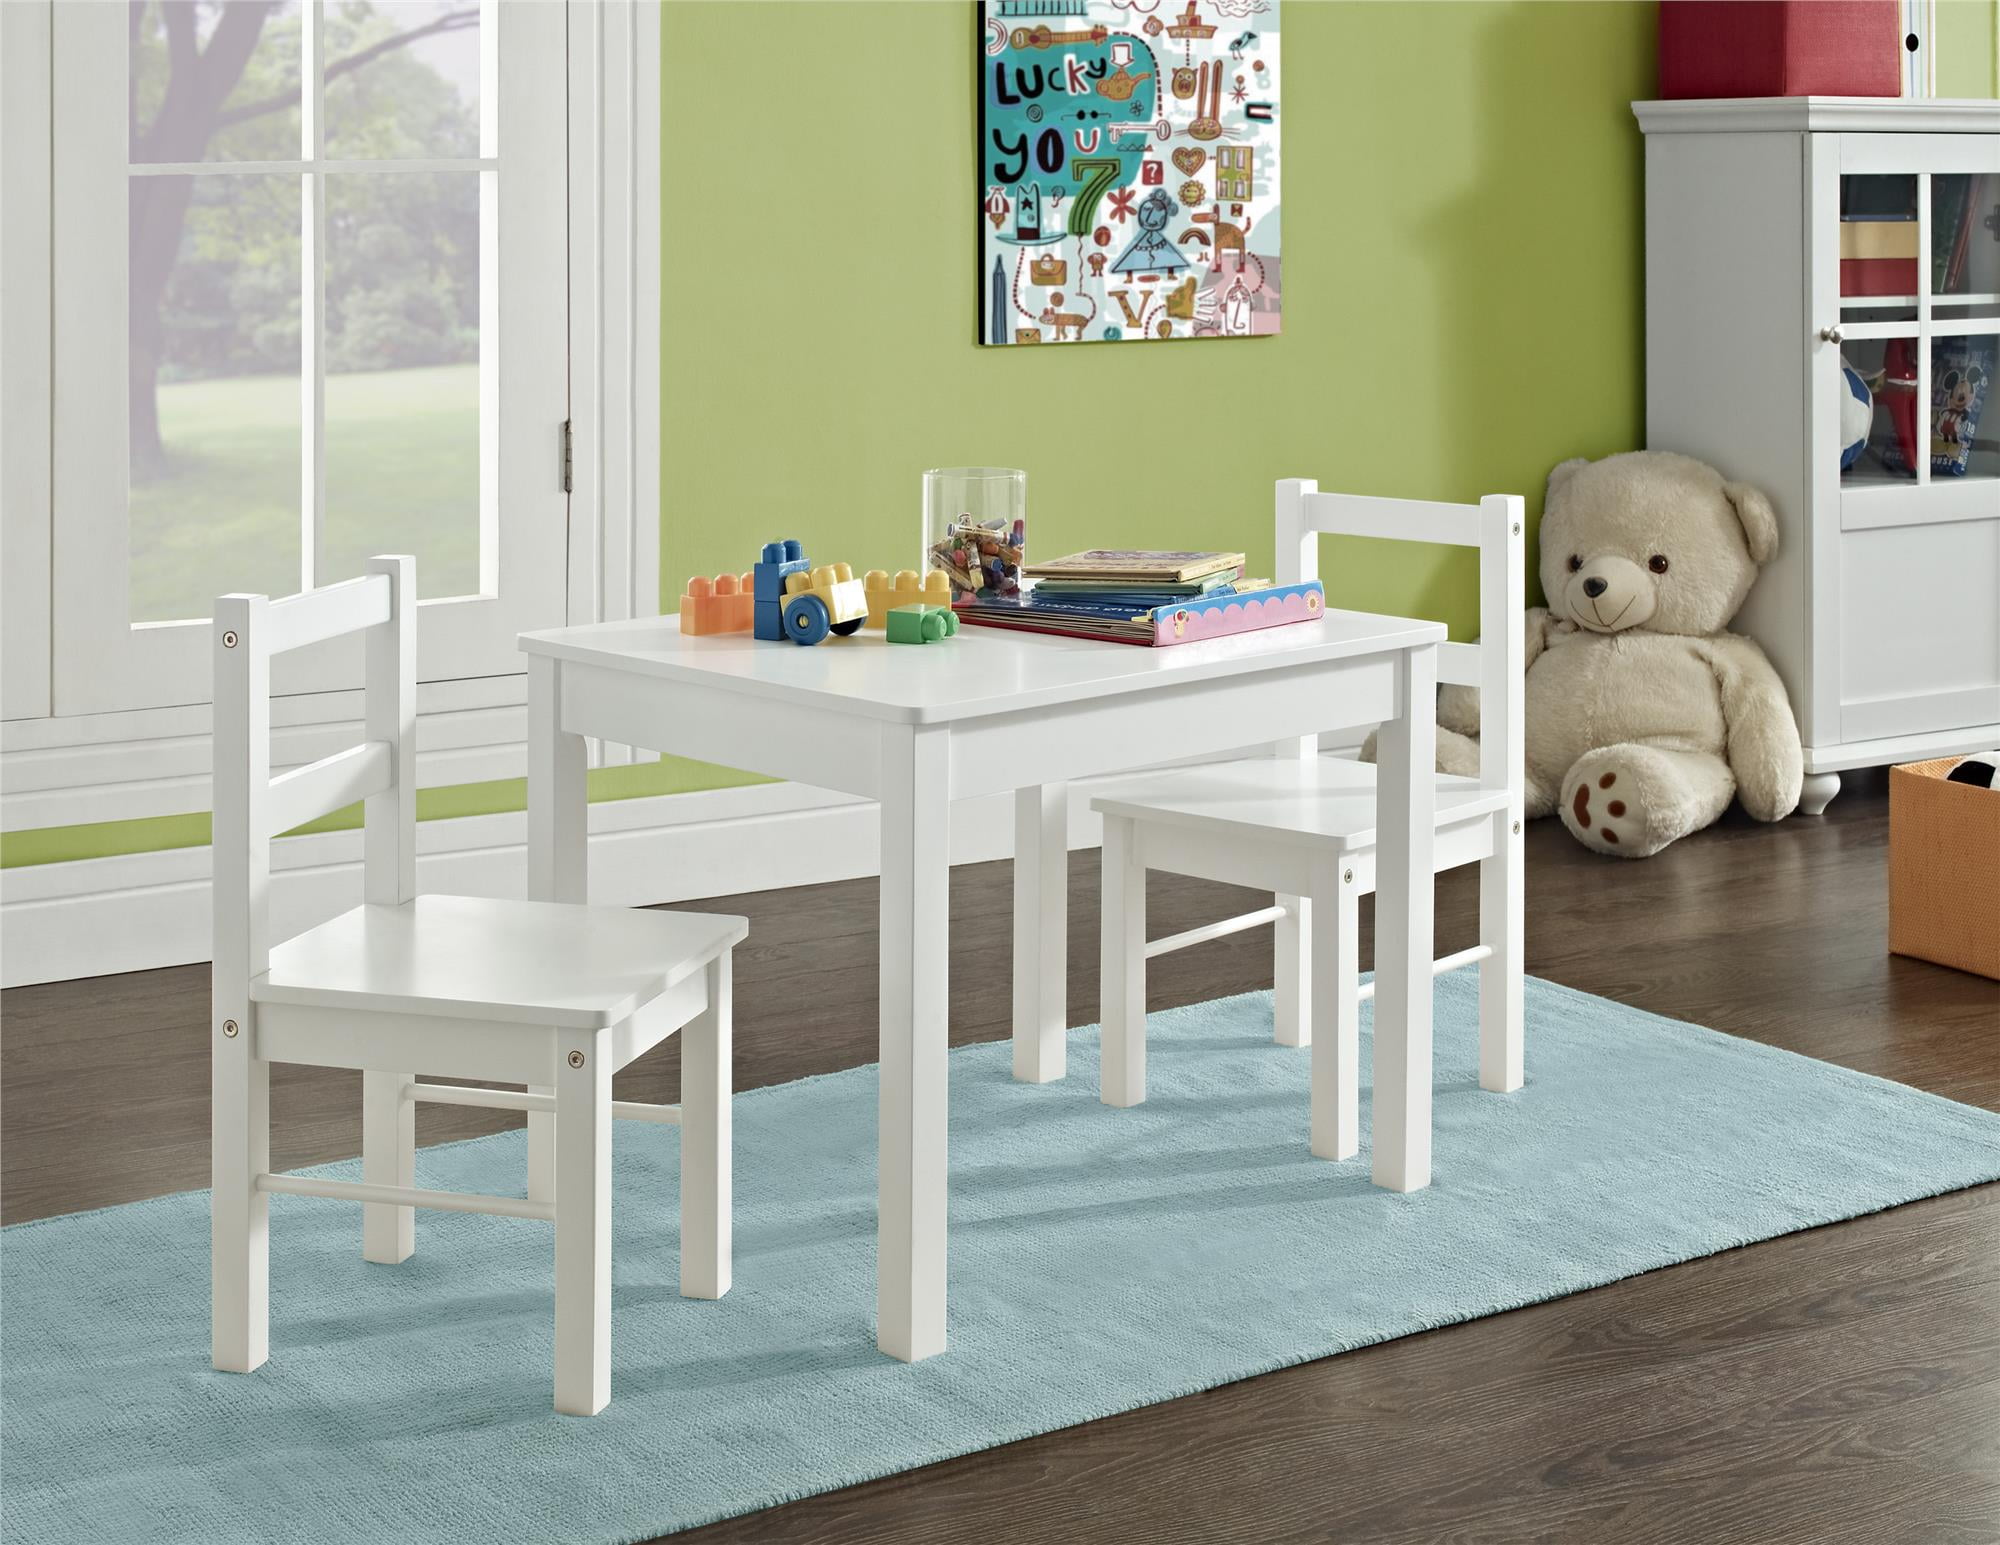 childrens bedroom table and chairs